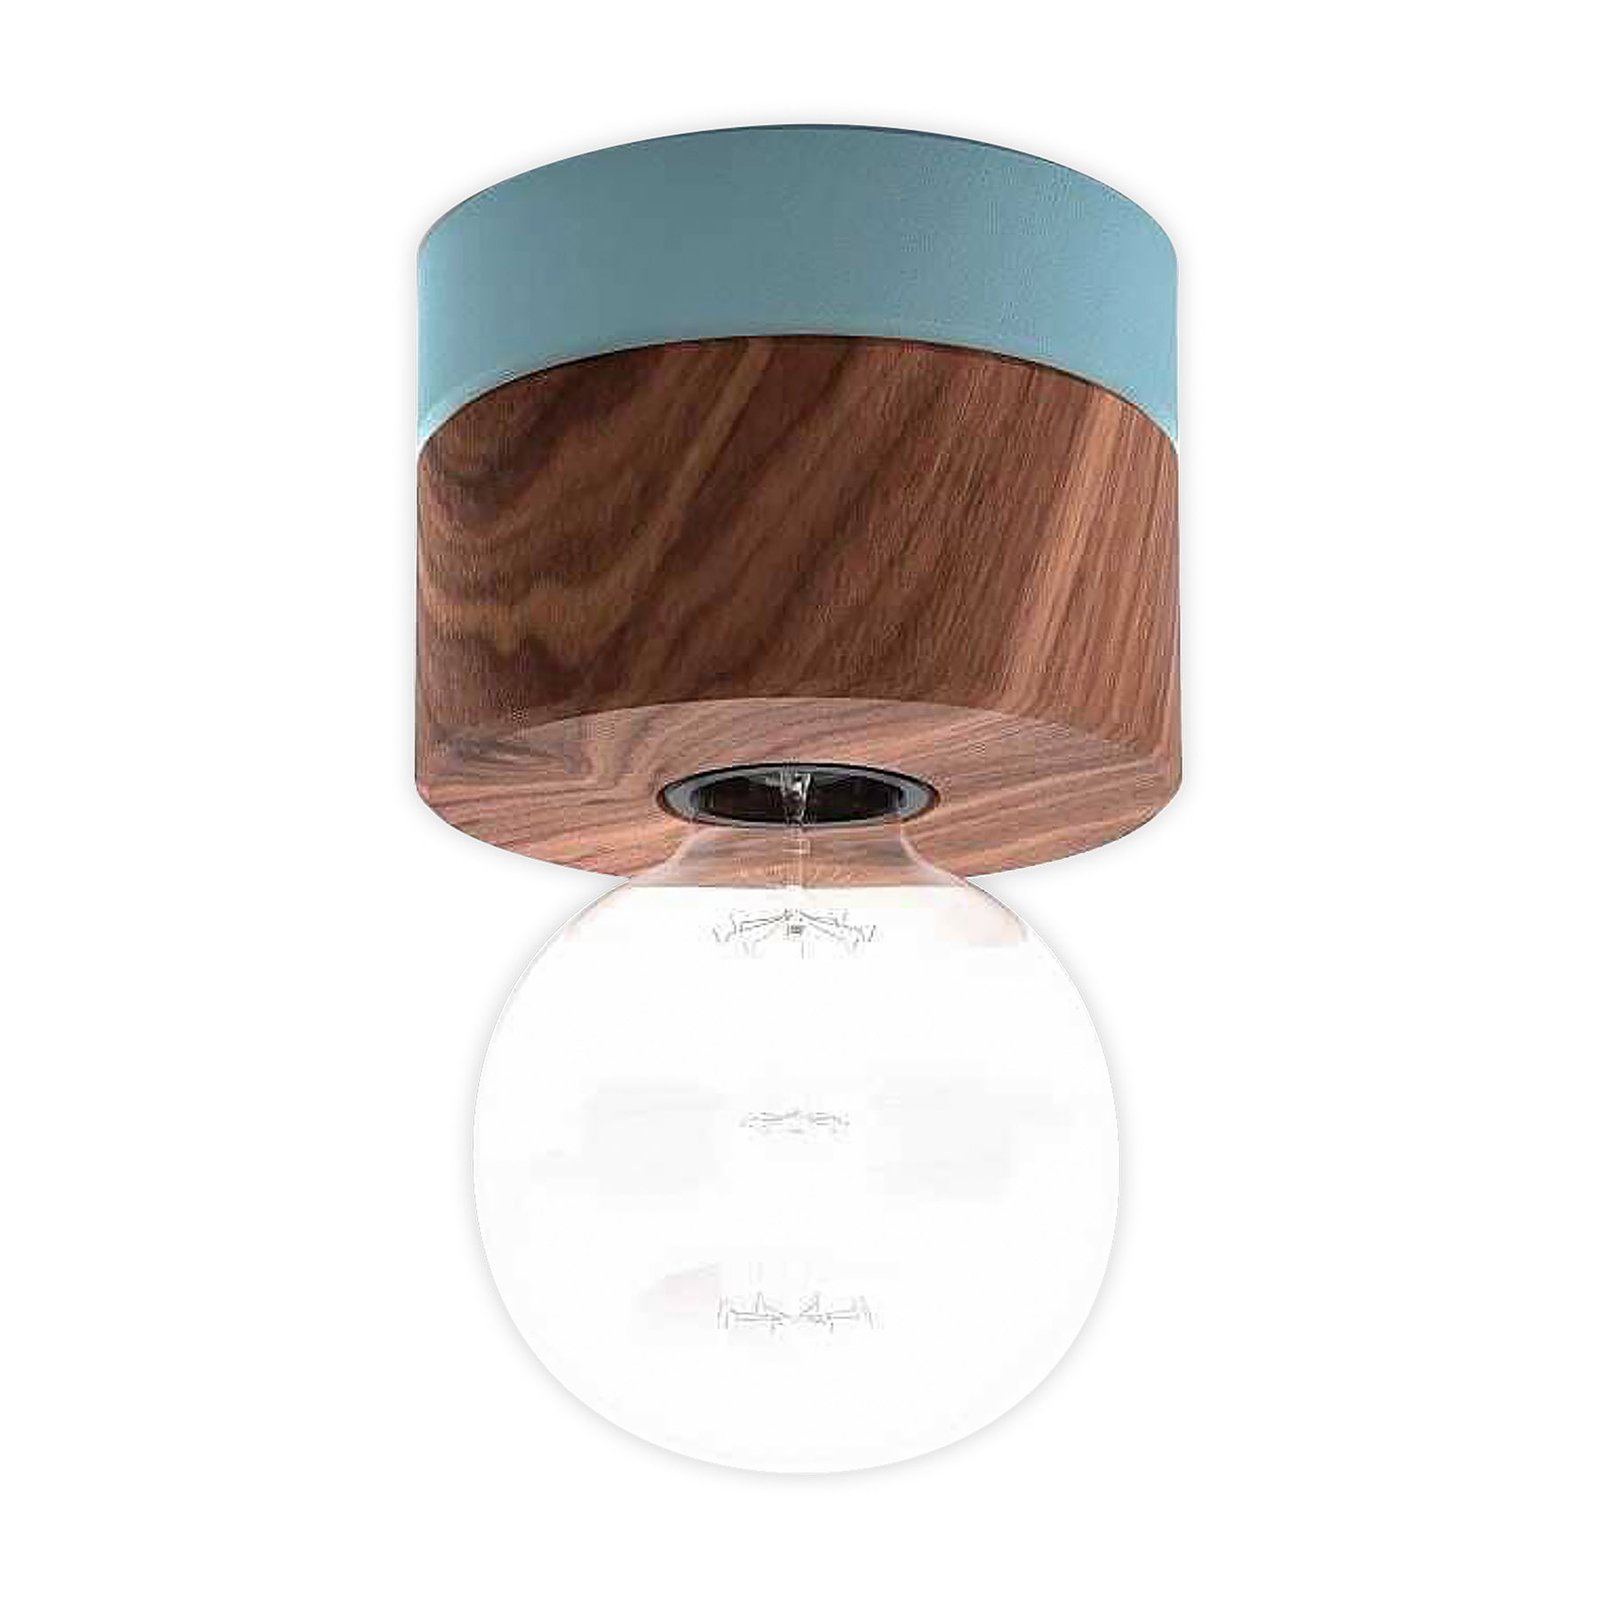 ALMUT 0239 ceiling lamp, sustainable, walnut/blue